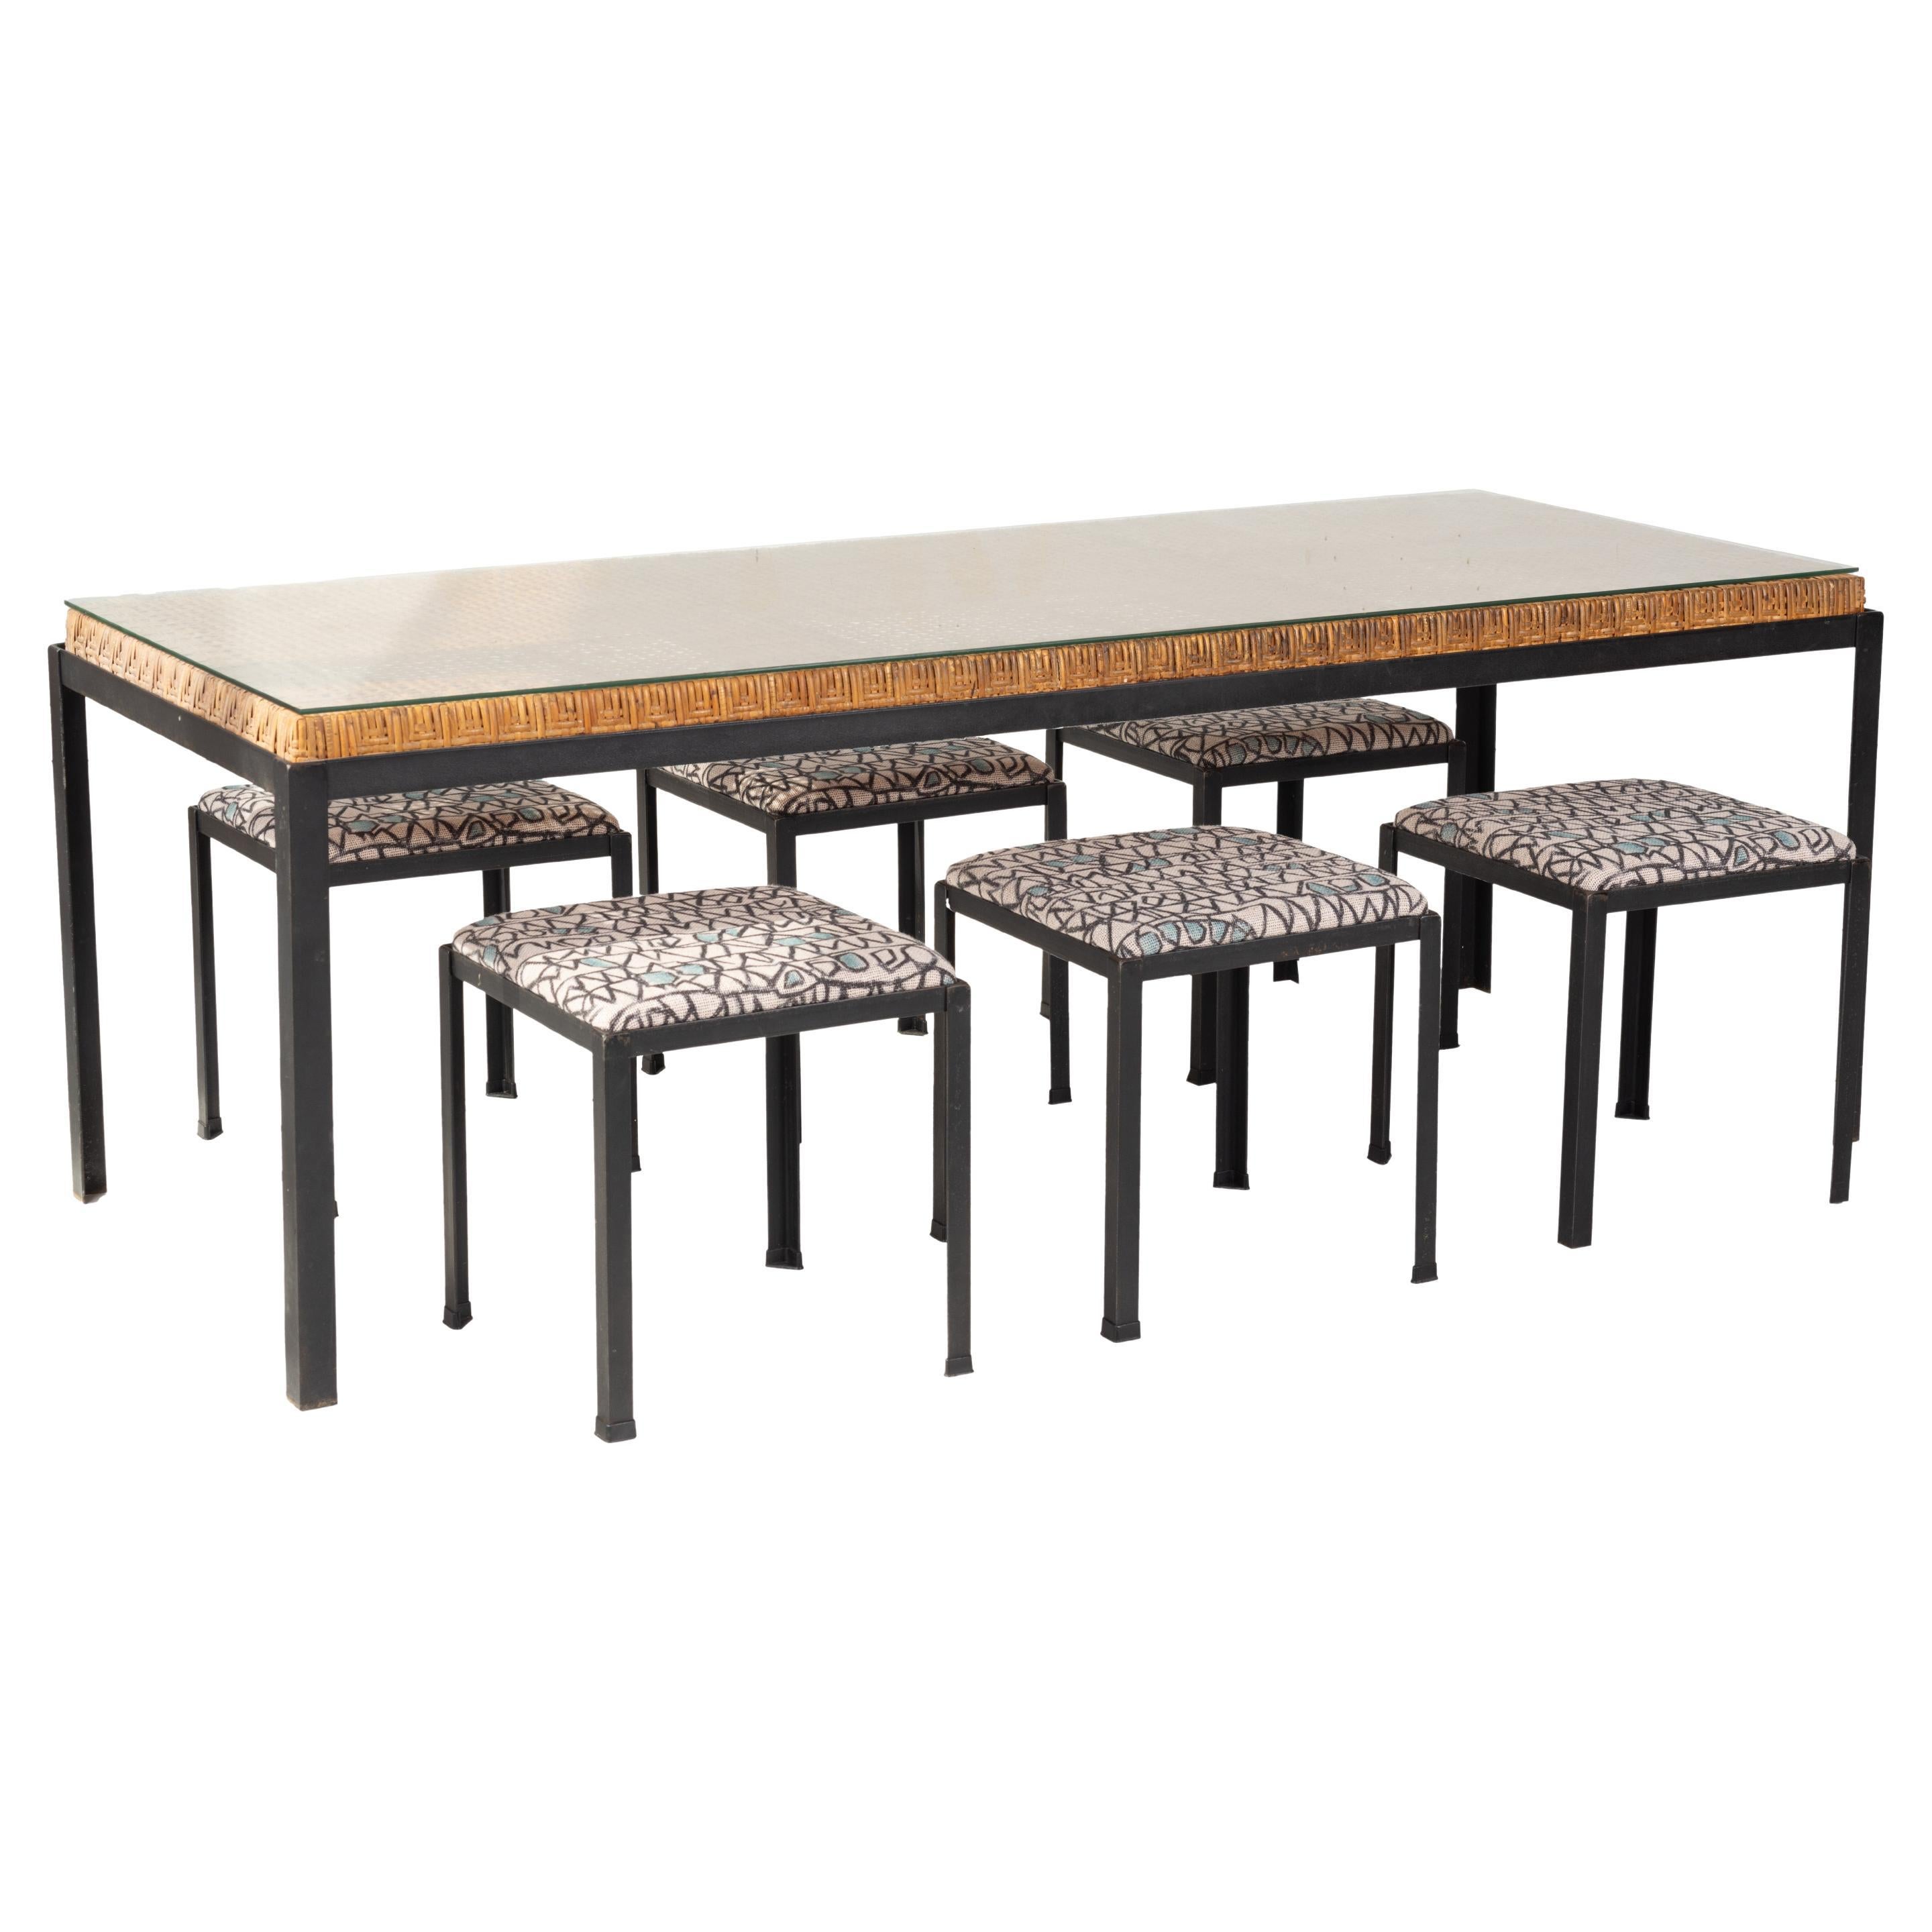 Danny Ho Fong Six Seat Dining Set For Sale